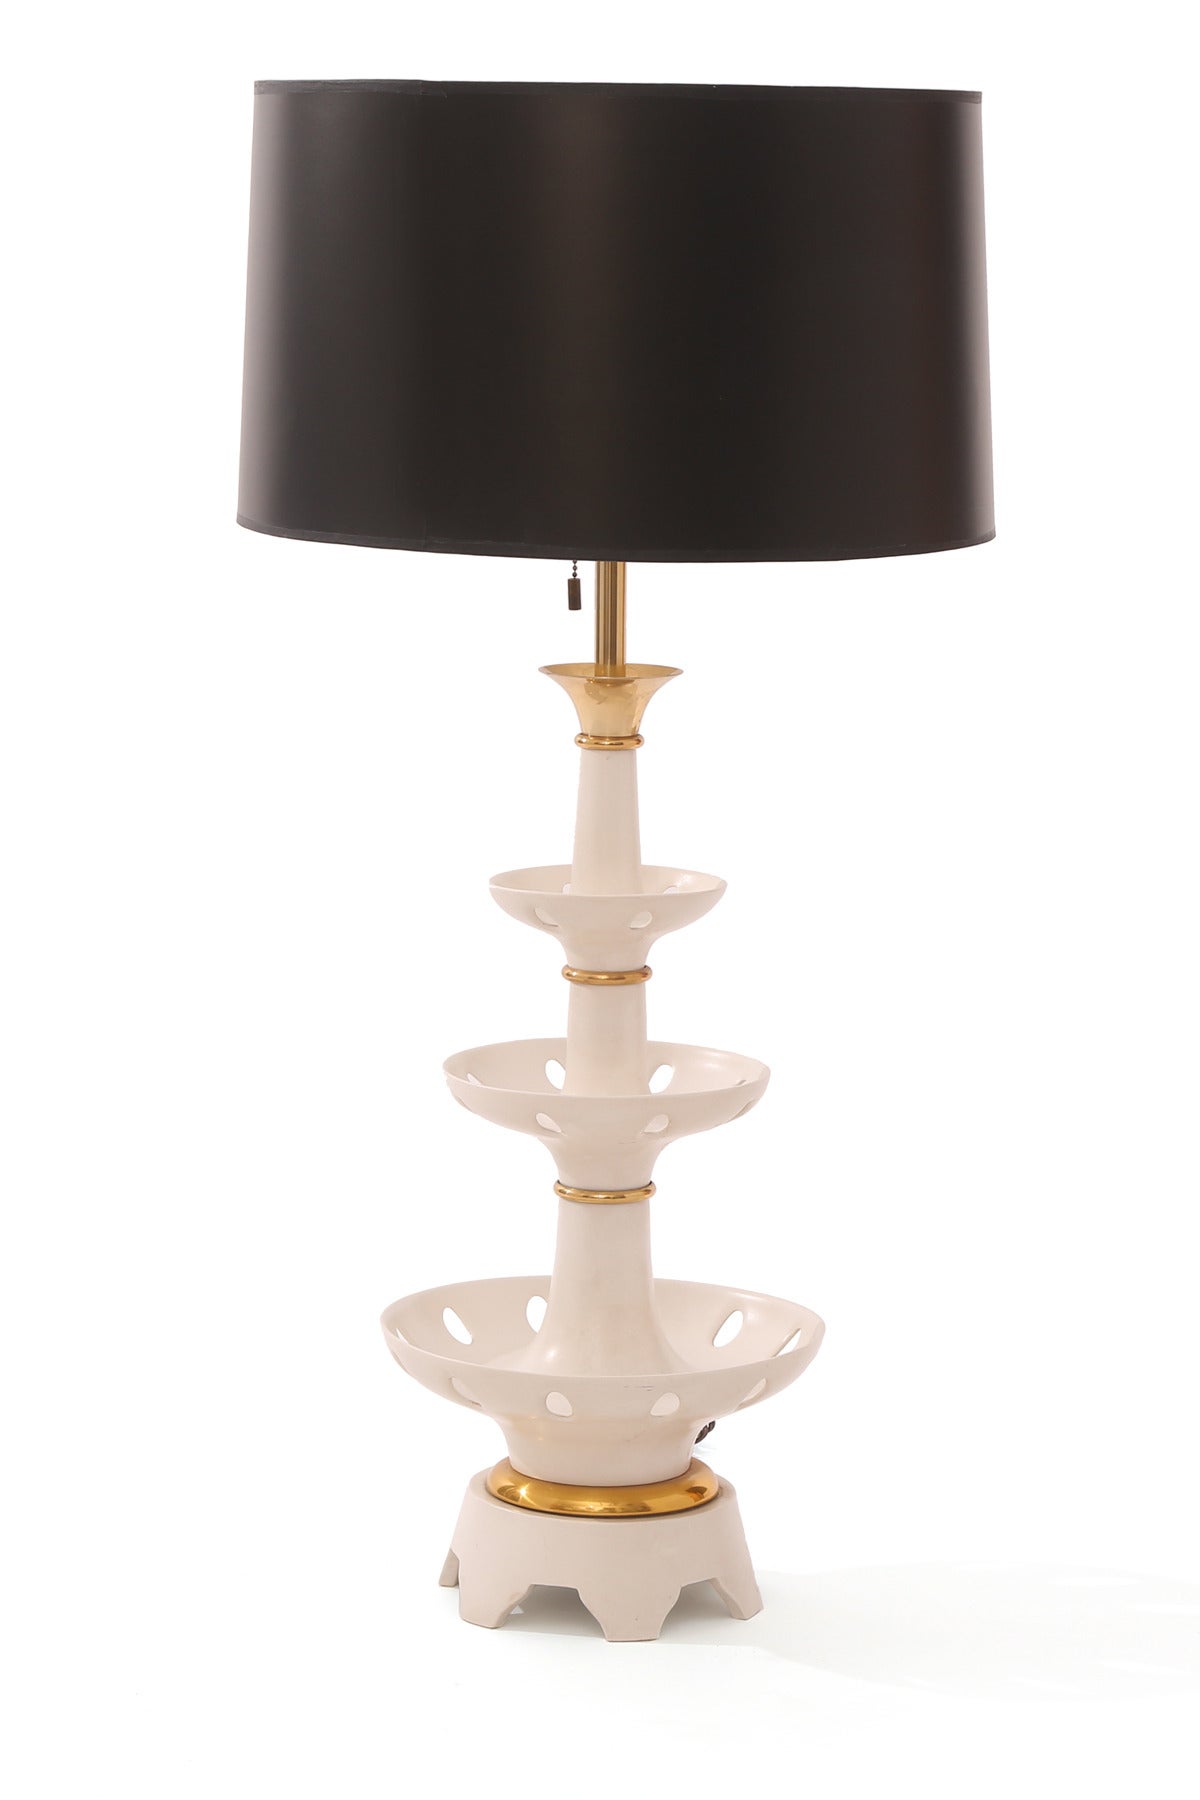 Large-scale pair of architectural table lamps by Gerald Thurston for Lightolier, circa mid-1950s. These fabulous examples have three ceramic tiers with circular cutouts and brass stems and accents. Measures: Height to top of socket is 30.5